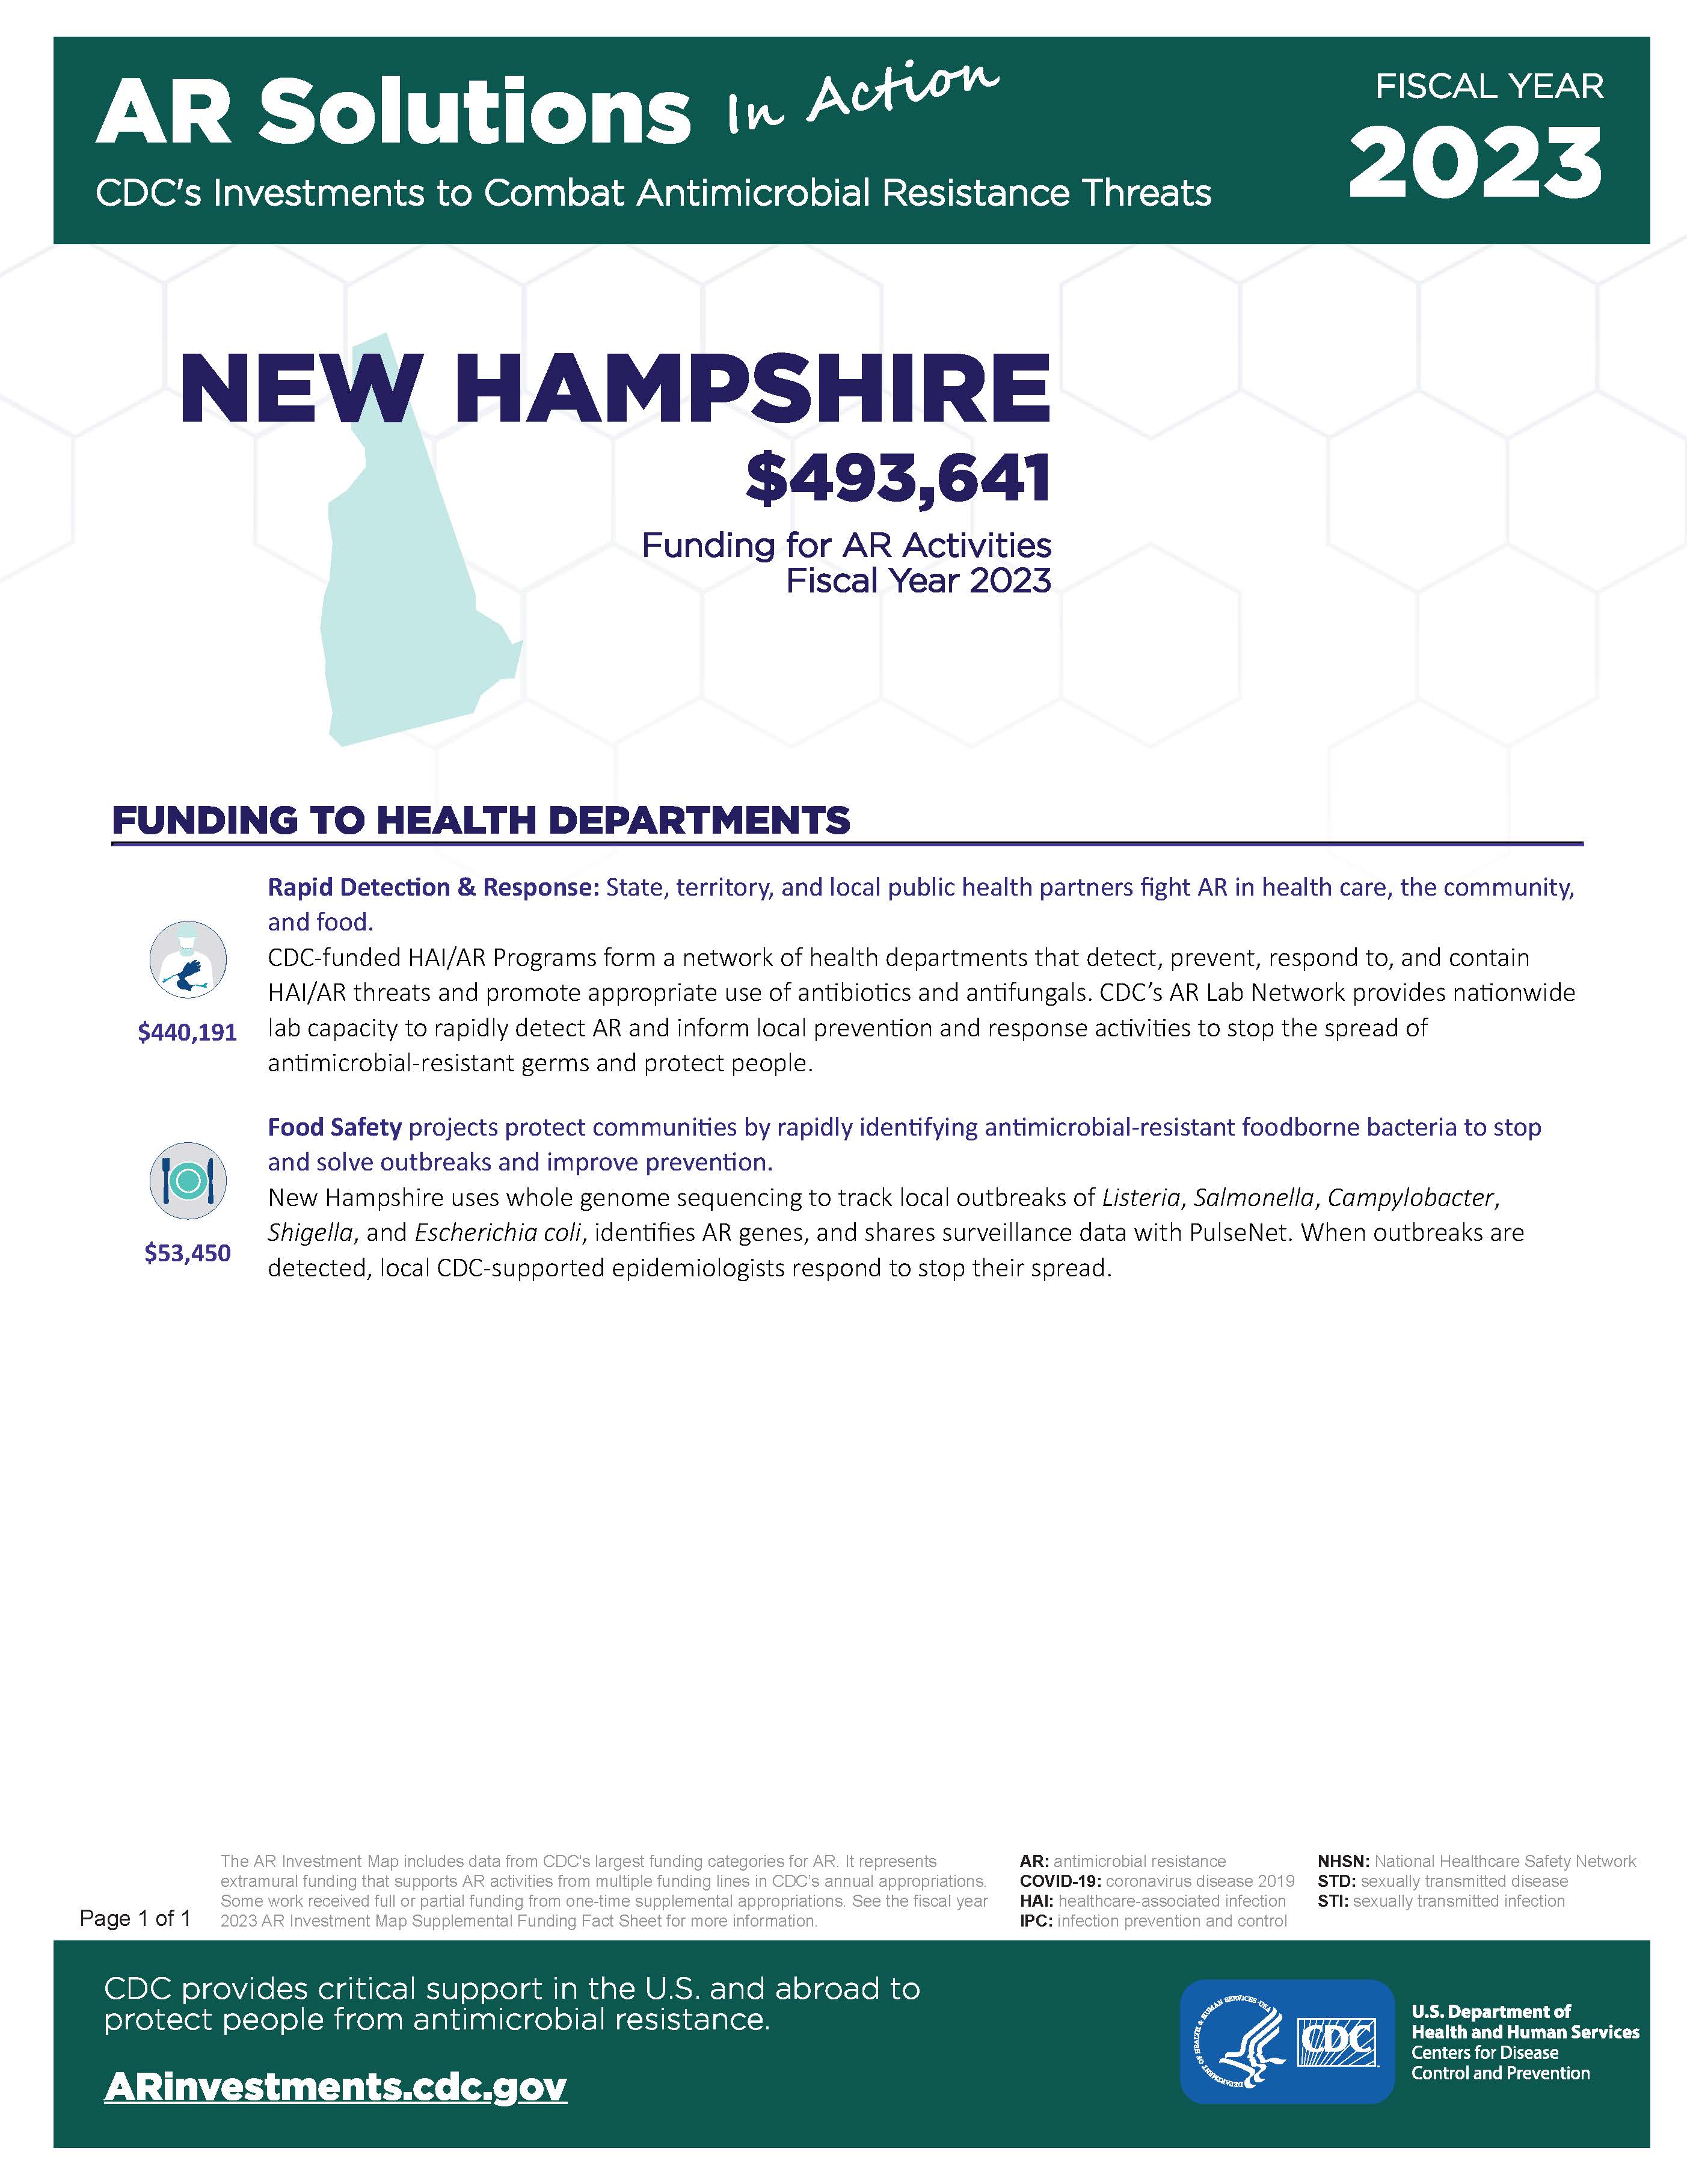 View Factsheet for New Hampshire